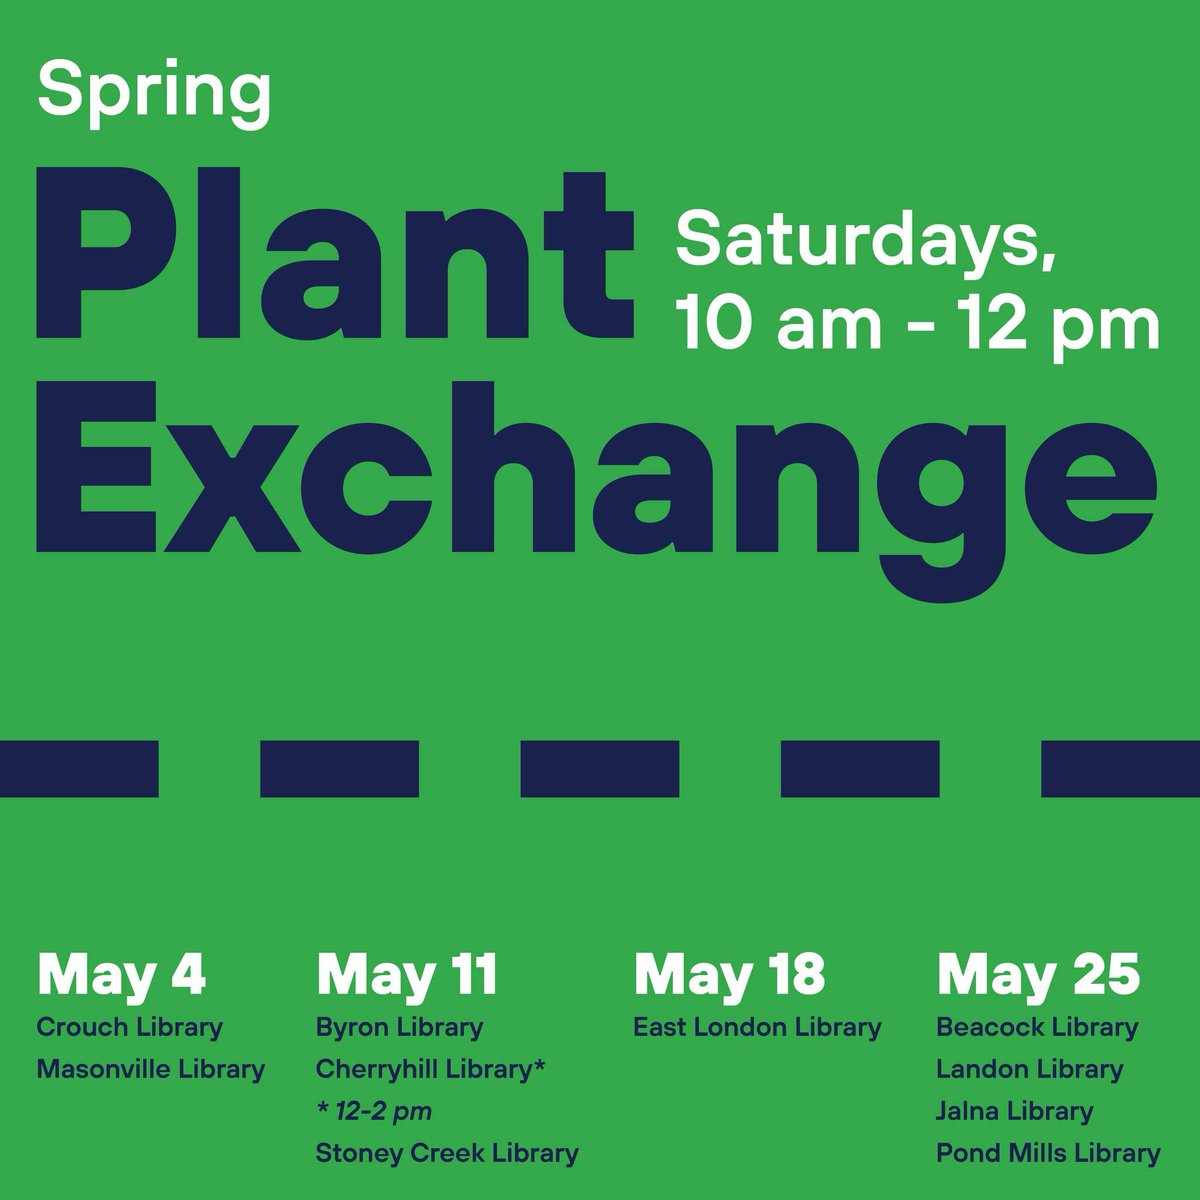 Next week’s plant exchanges take place at Byron, Cherryhill and Stoney Creek library branches. 🌸